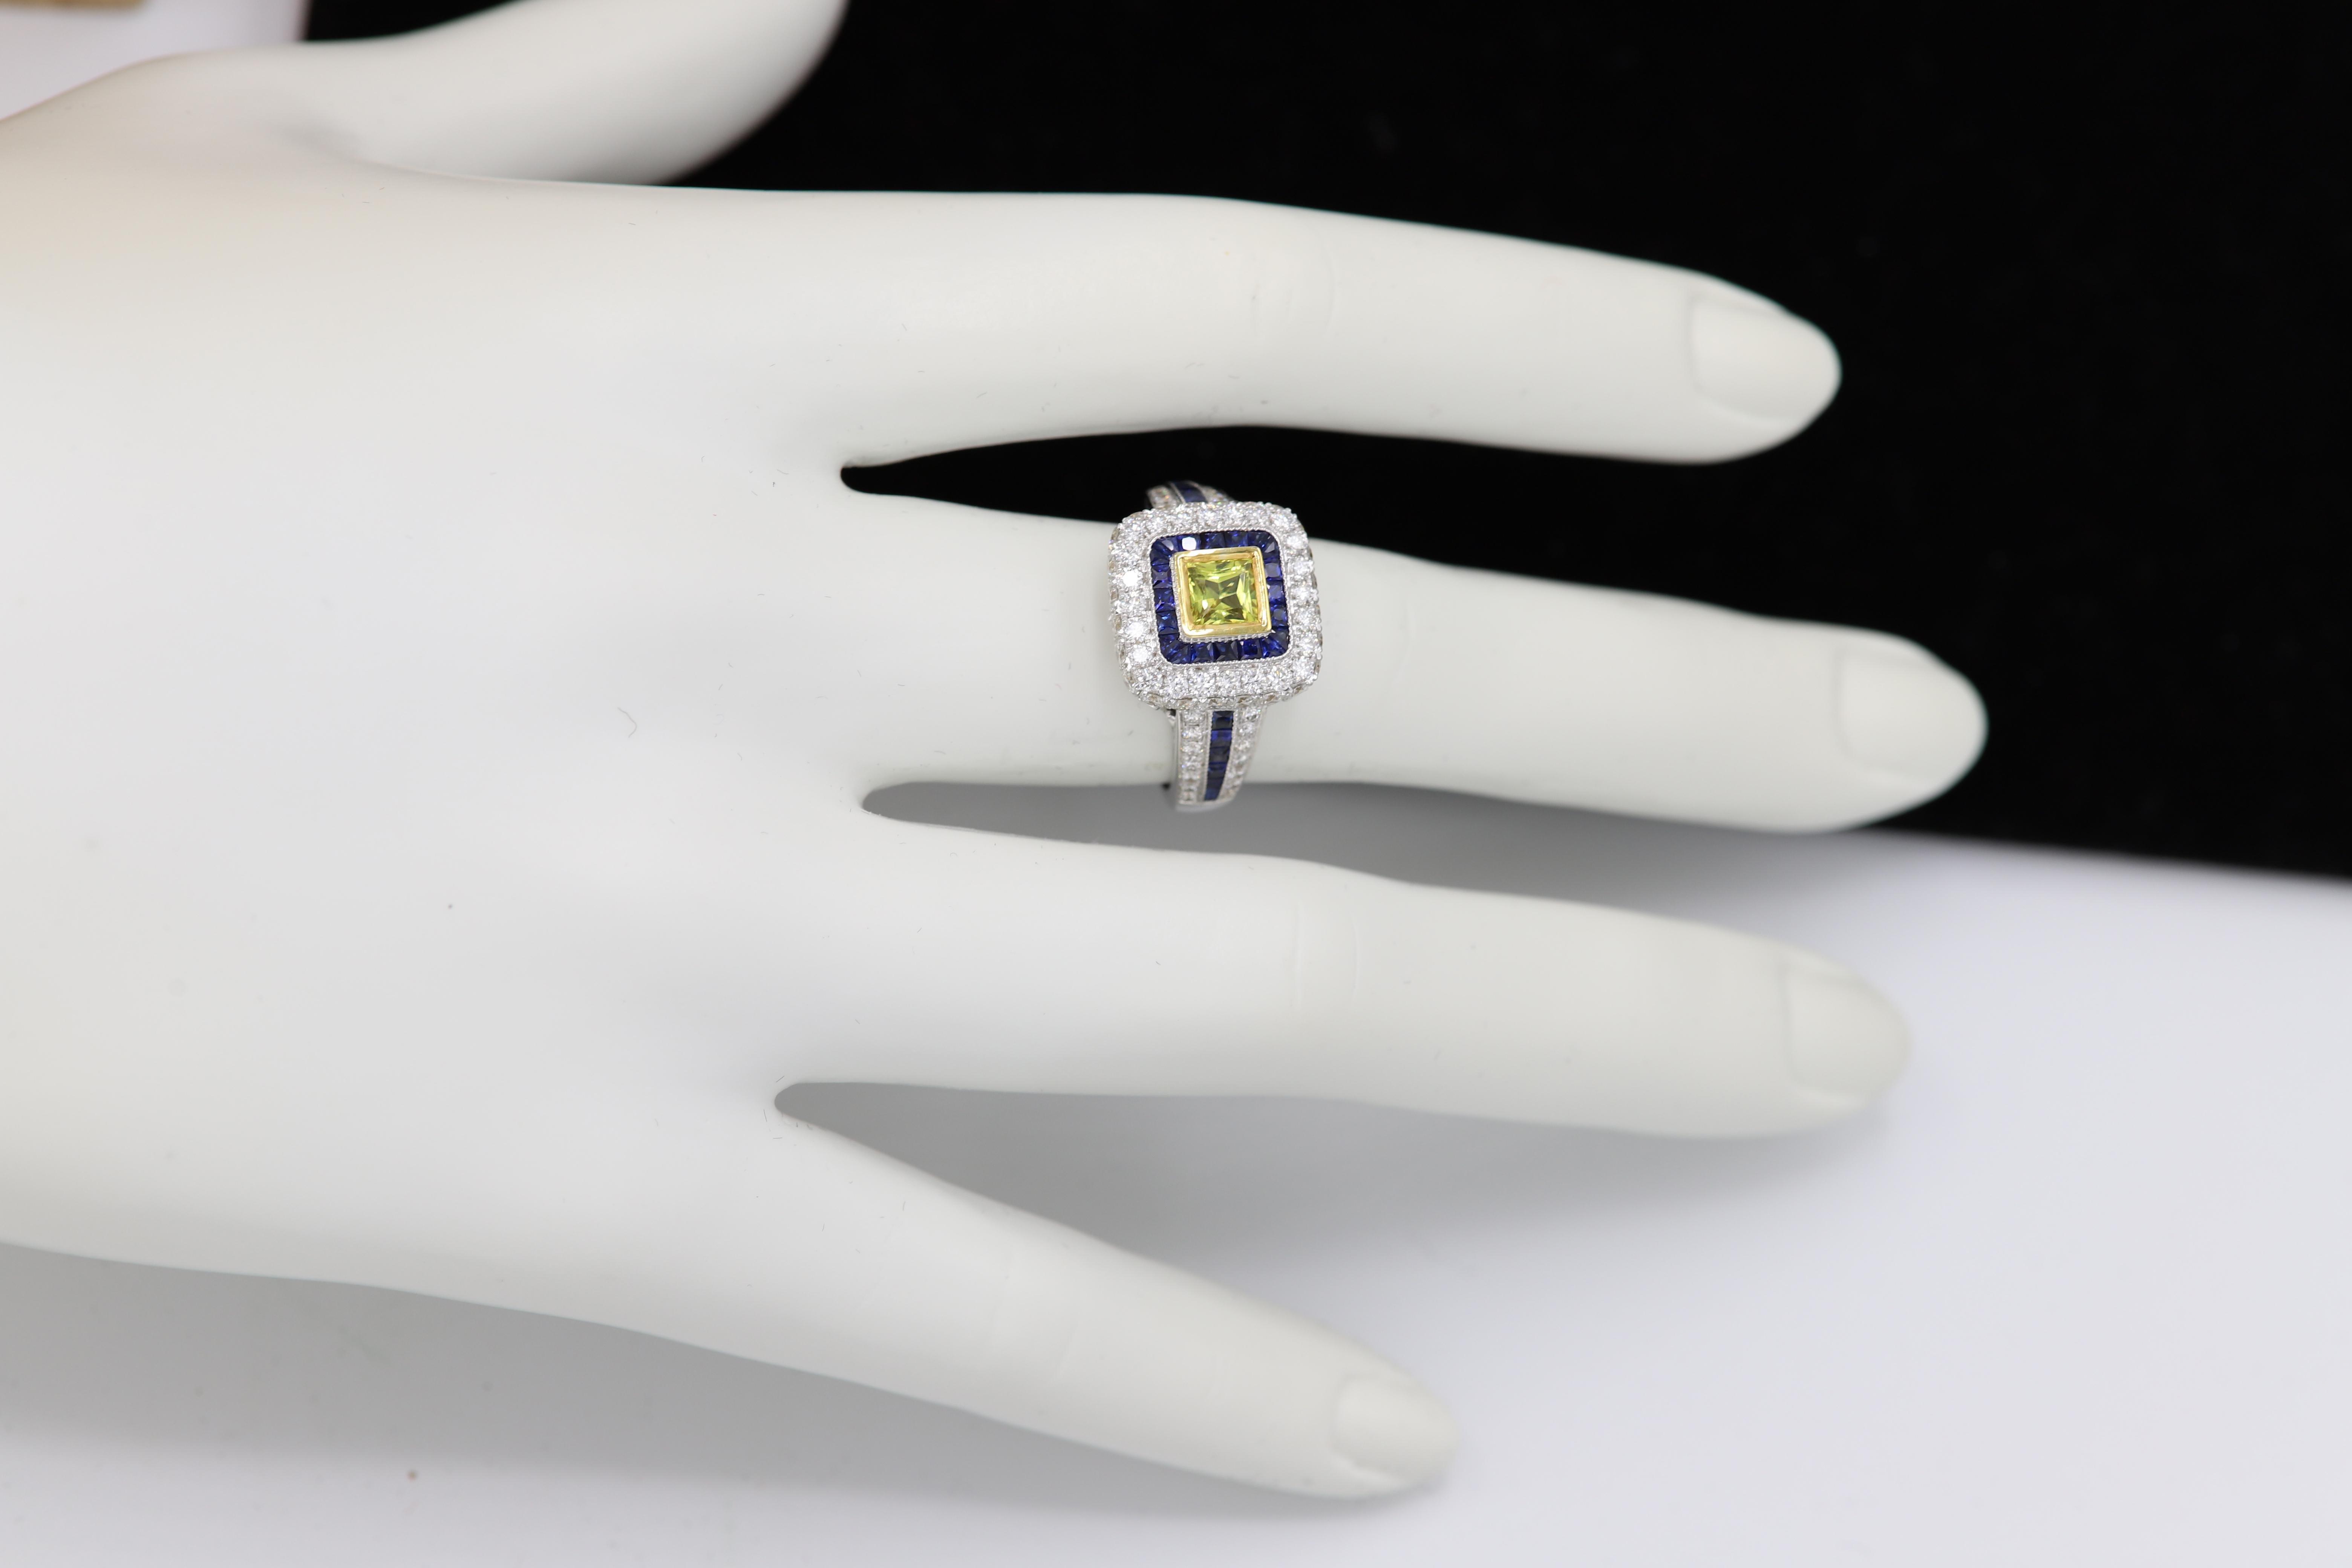 Brilliant Art Deco Style Ring. 18k White Gold 9.80 grams. Total all Diamonds 1.55 carat (center stone is princess cut Yellow Sapphire 0.70 carat) Blue sapphire total 0.97 carat. overall design area size on the top is 13 x 13 mm. Finger size